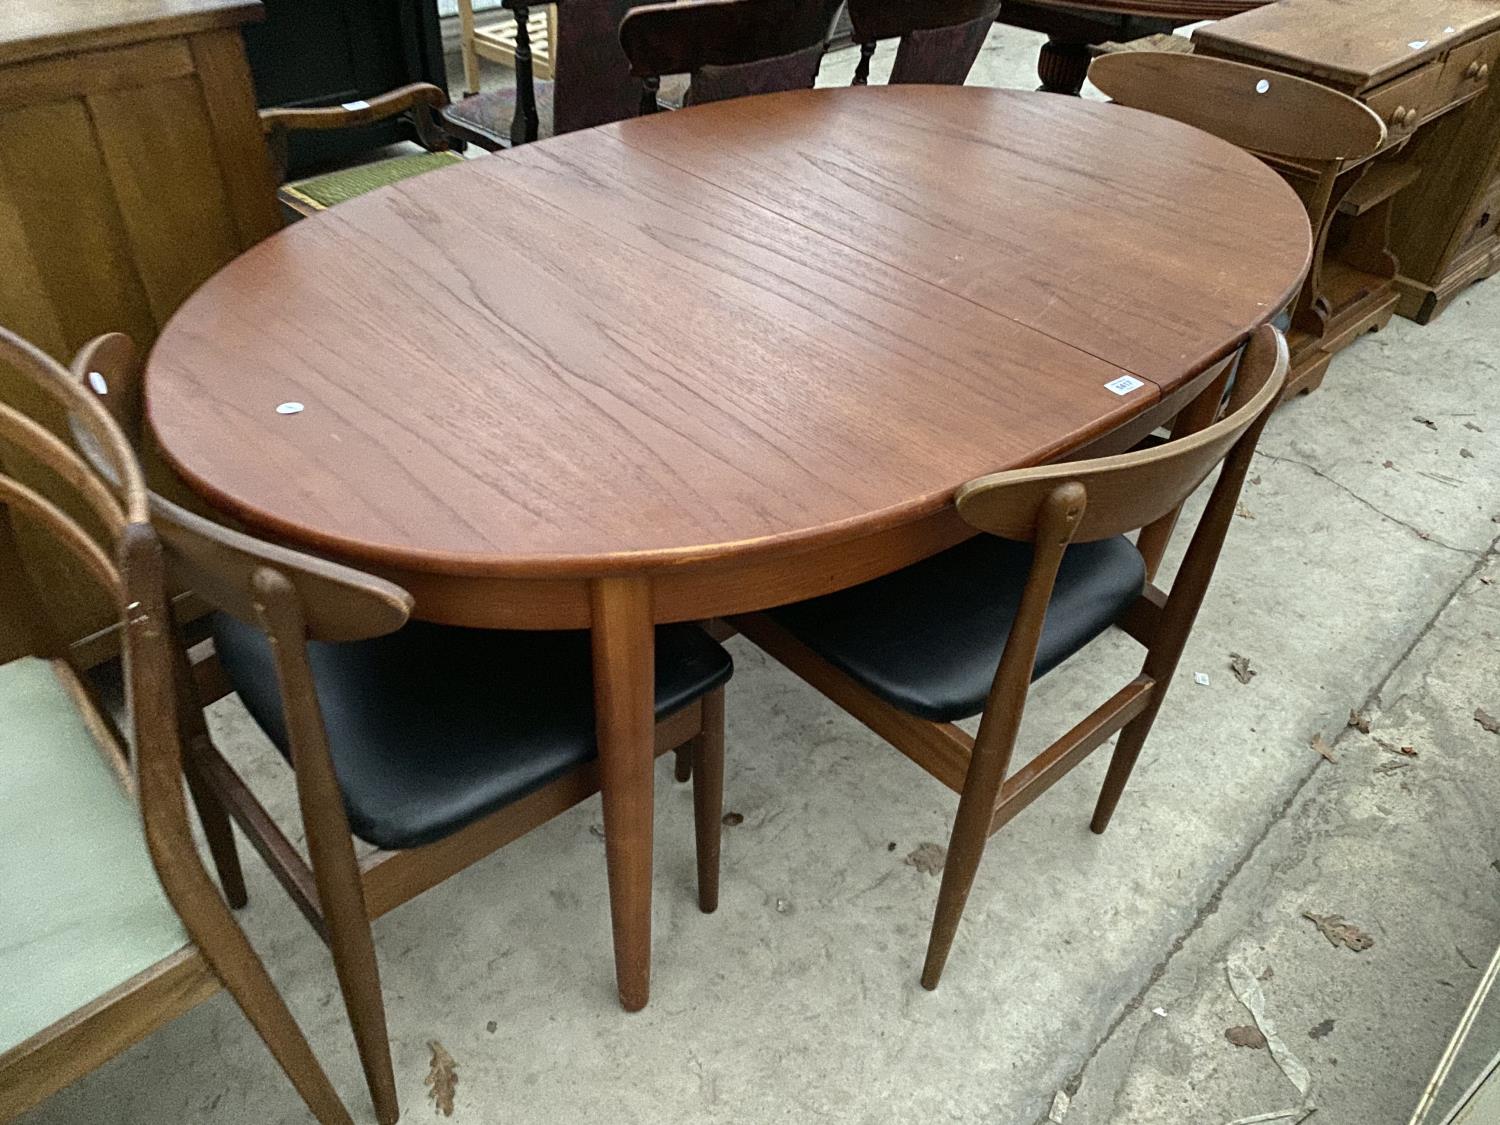 A TEAK EXTENDING DINING TABLE WITH THREE CHAIRS